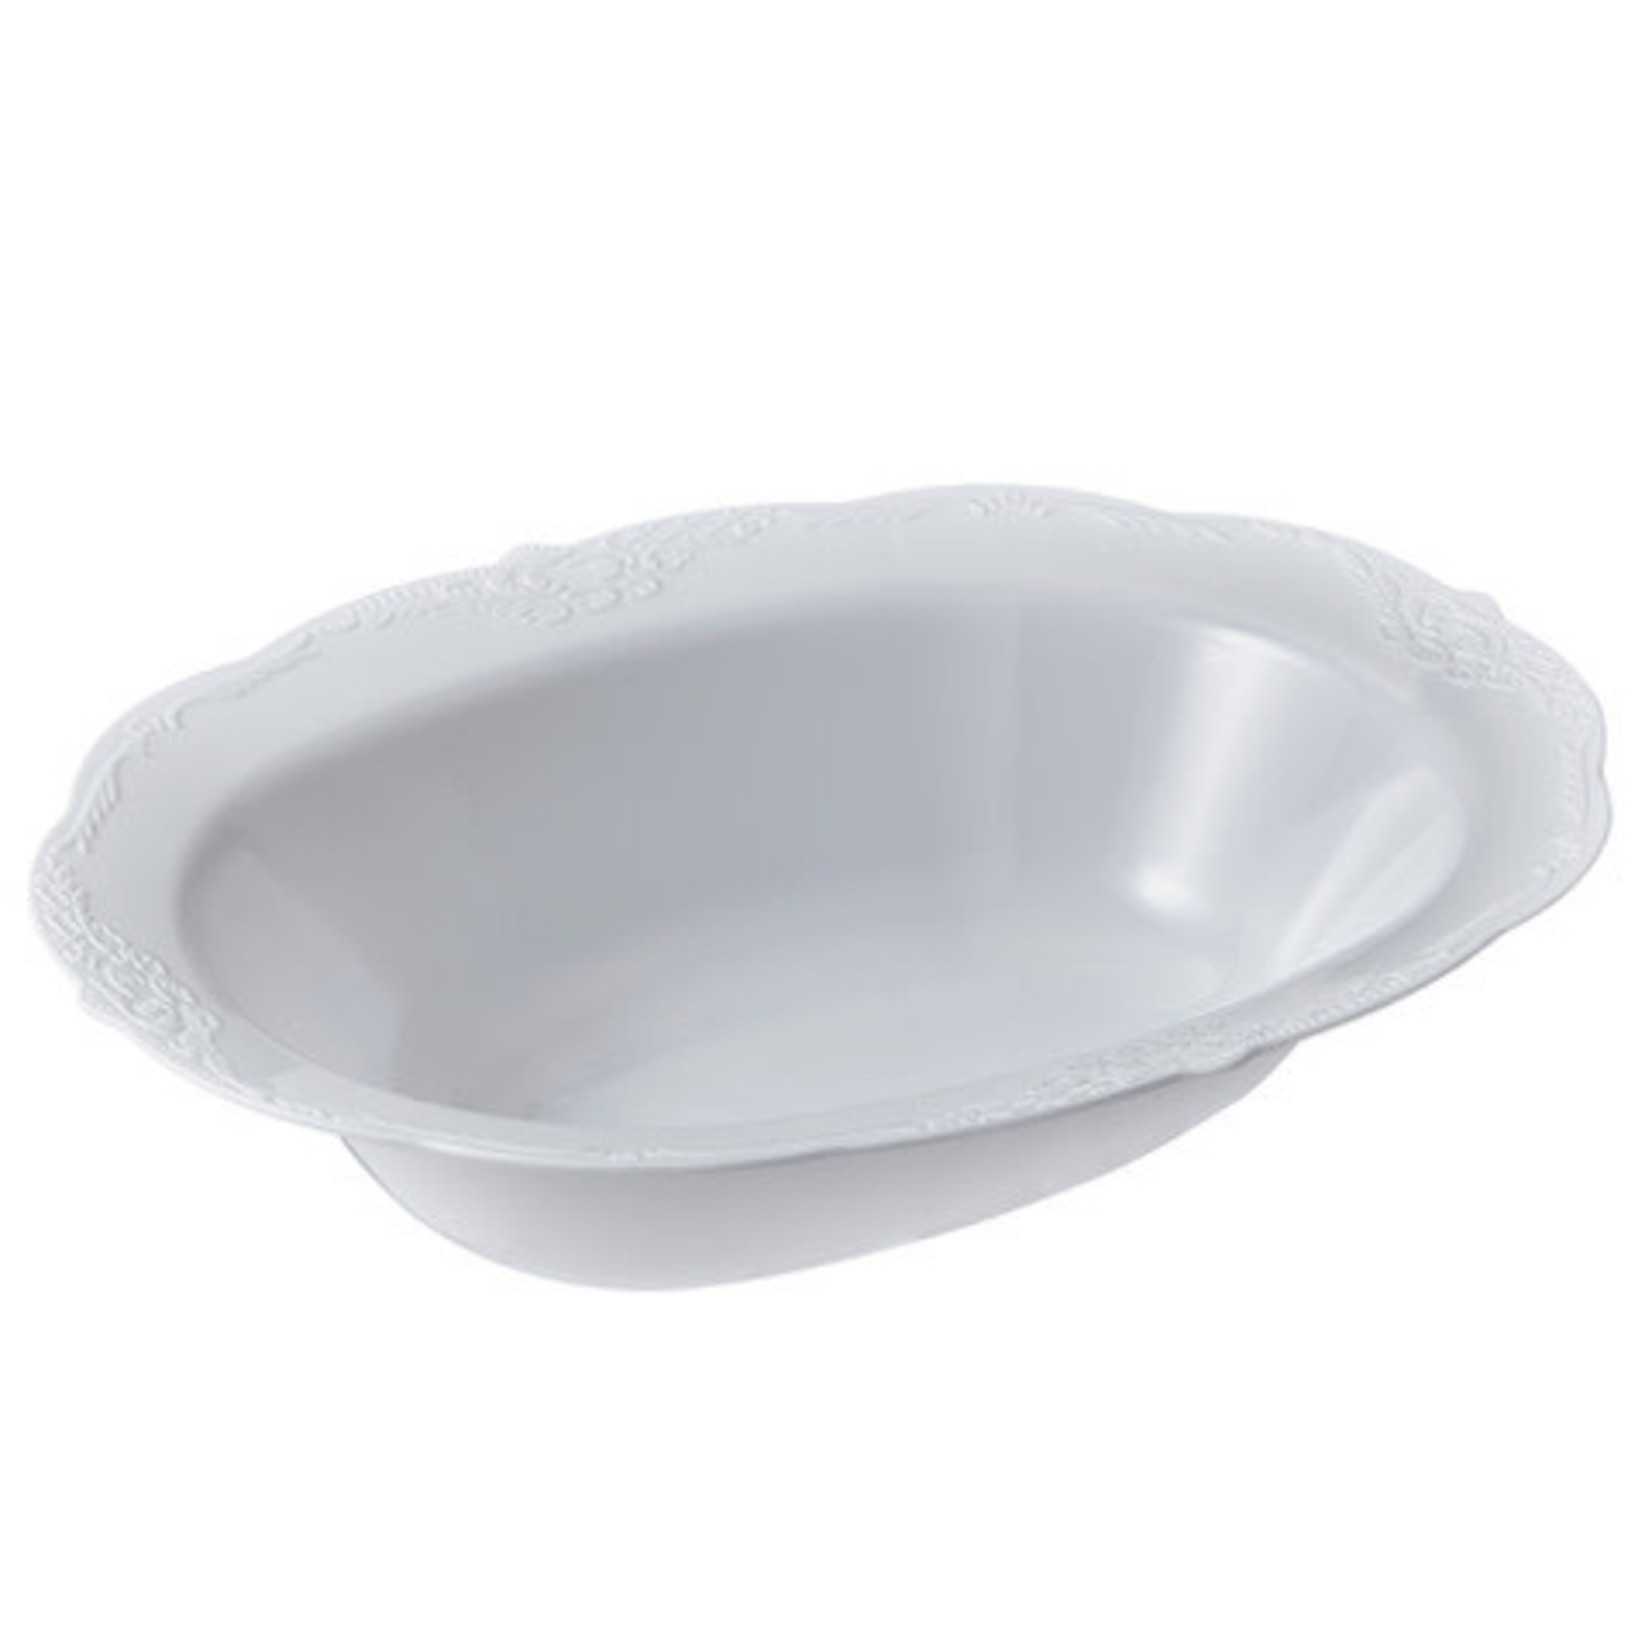 Silverspoons Vintage White, Oval Bowls - 3/Pack